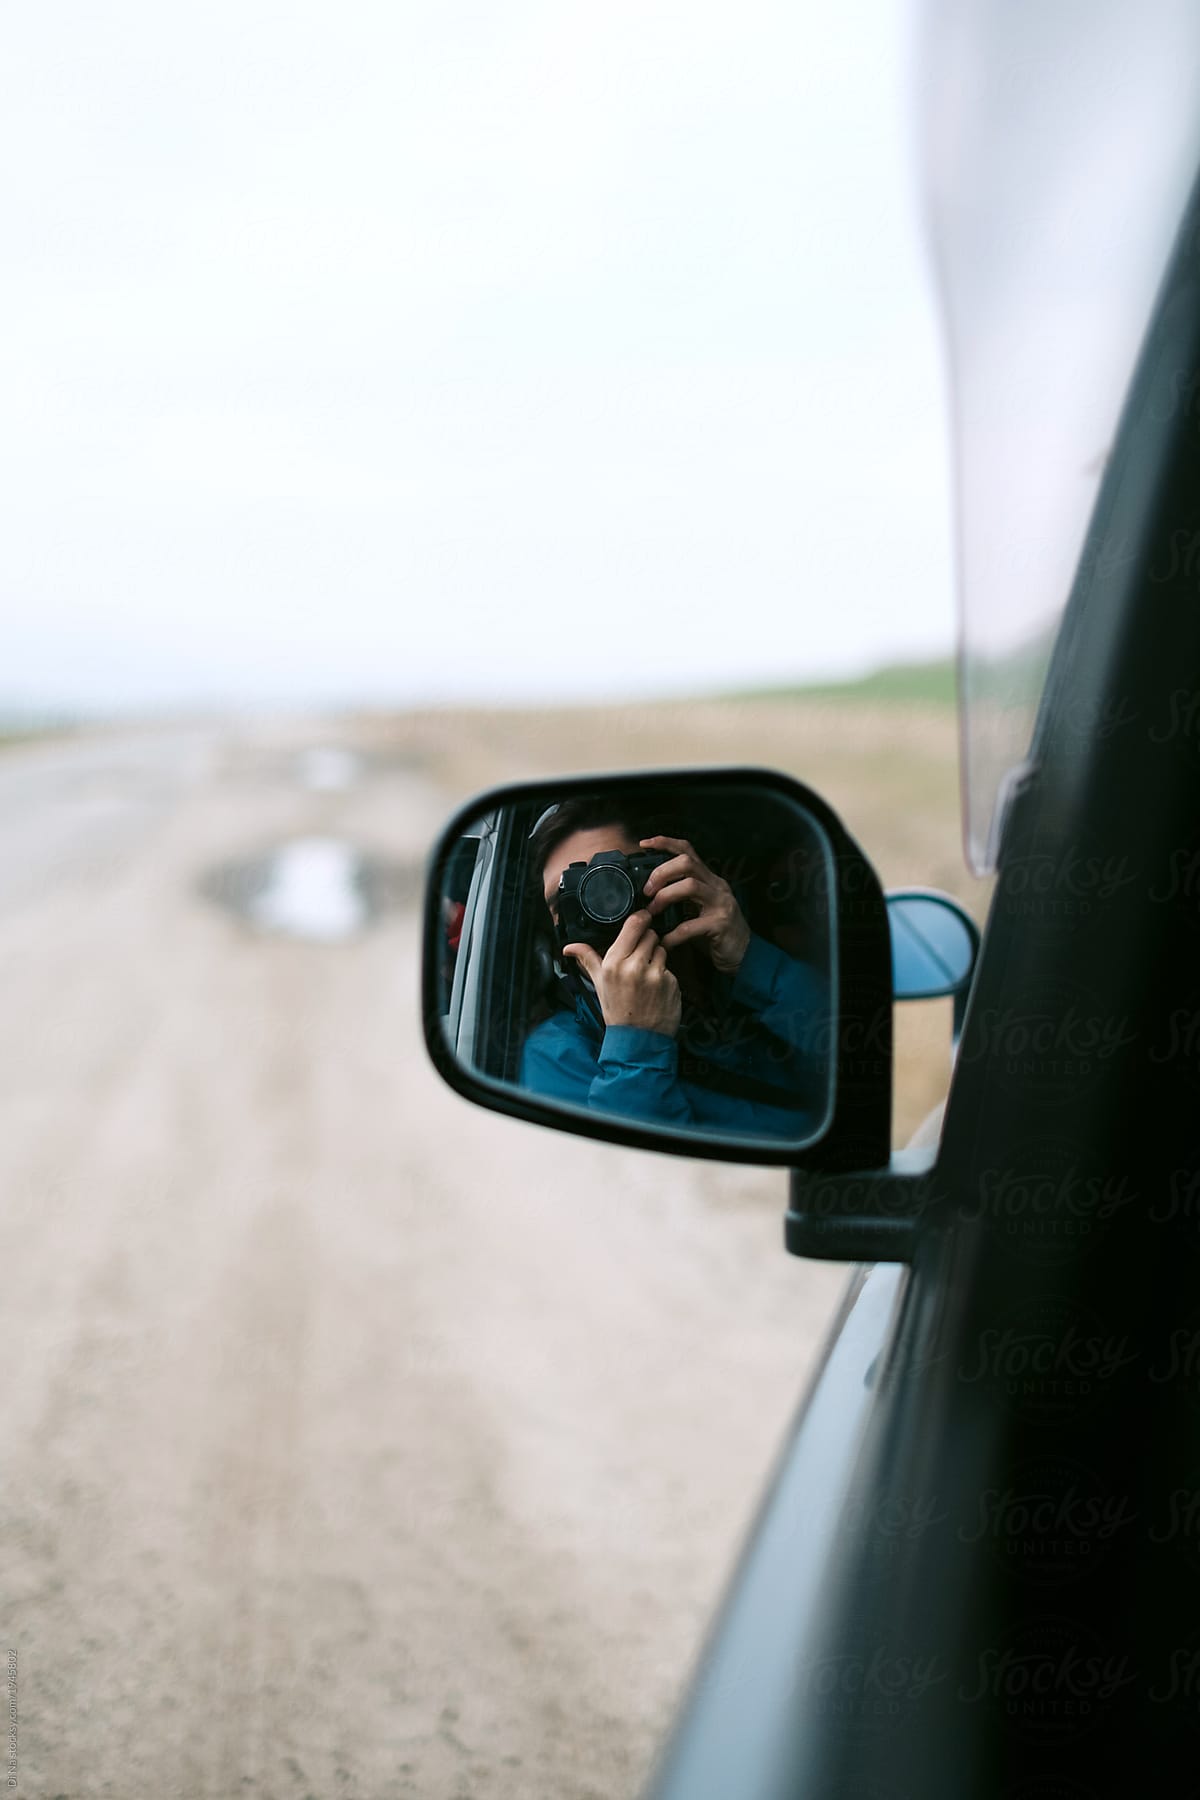 Young man taking photo in the mirror of a car